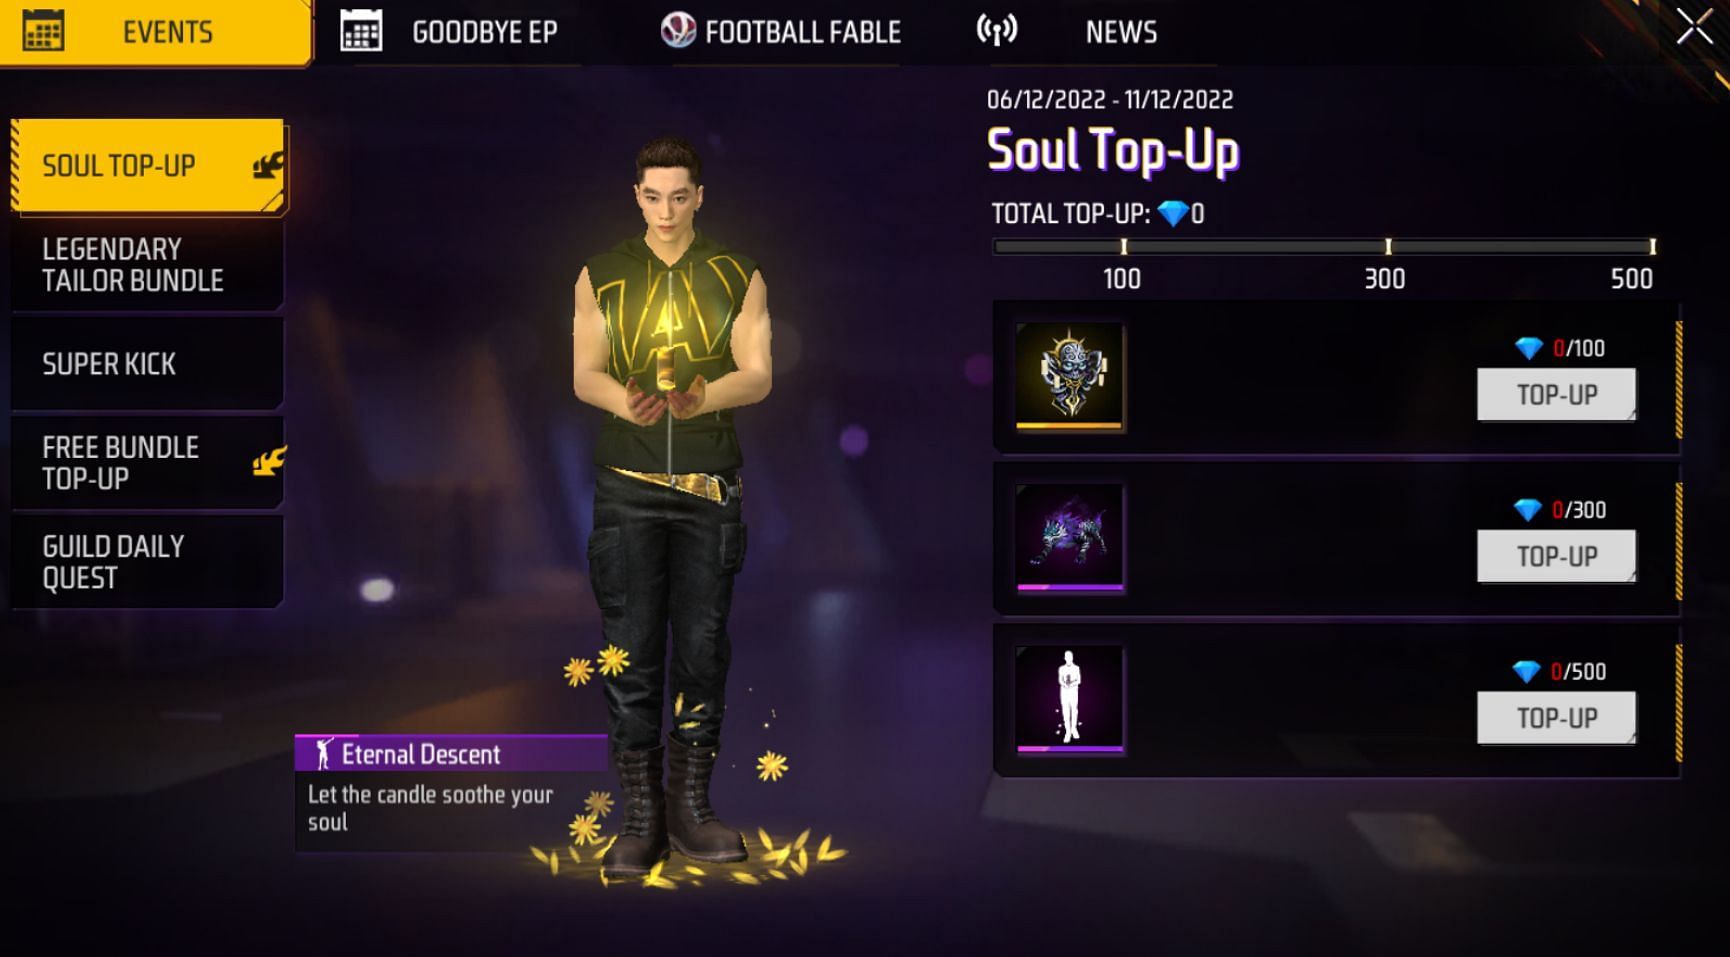 The Soul Top-Up event is active in the game right now (Image via Garena)